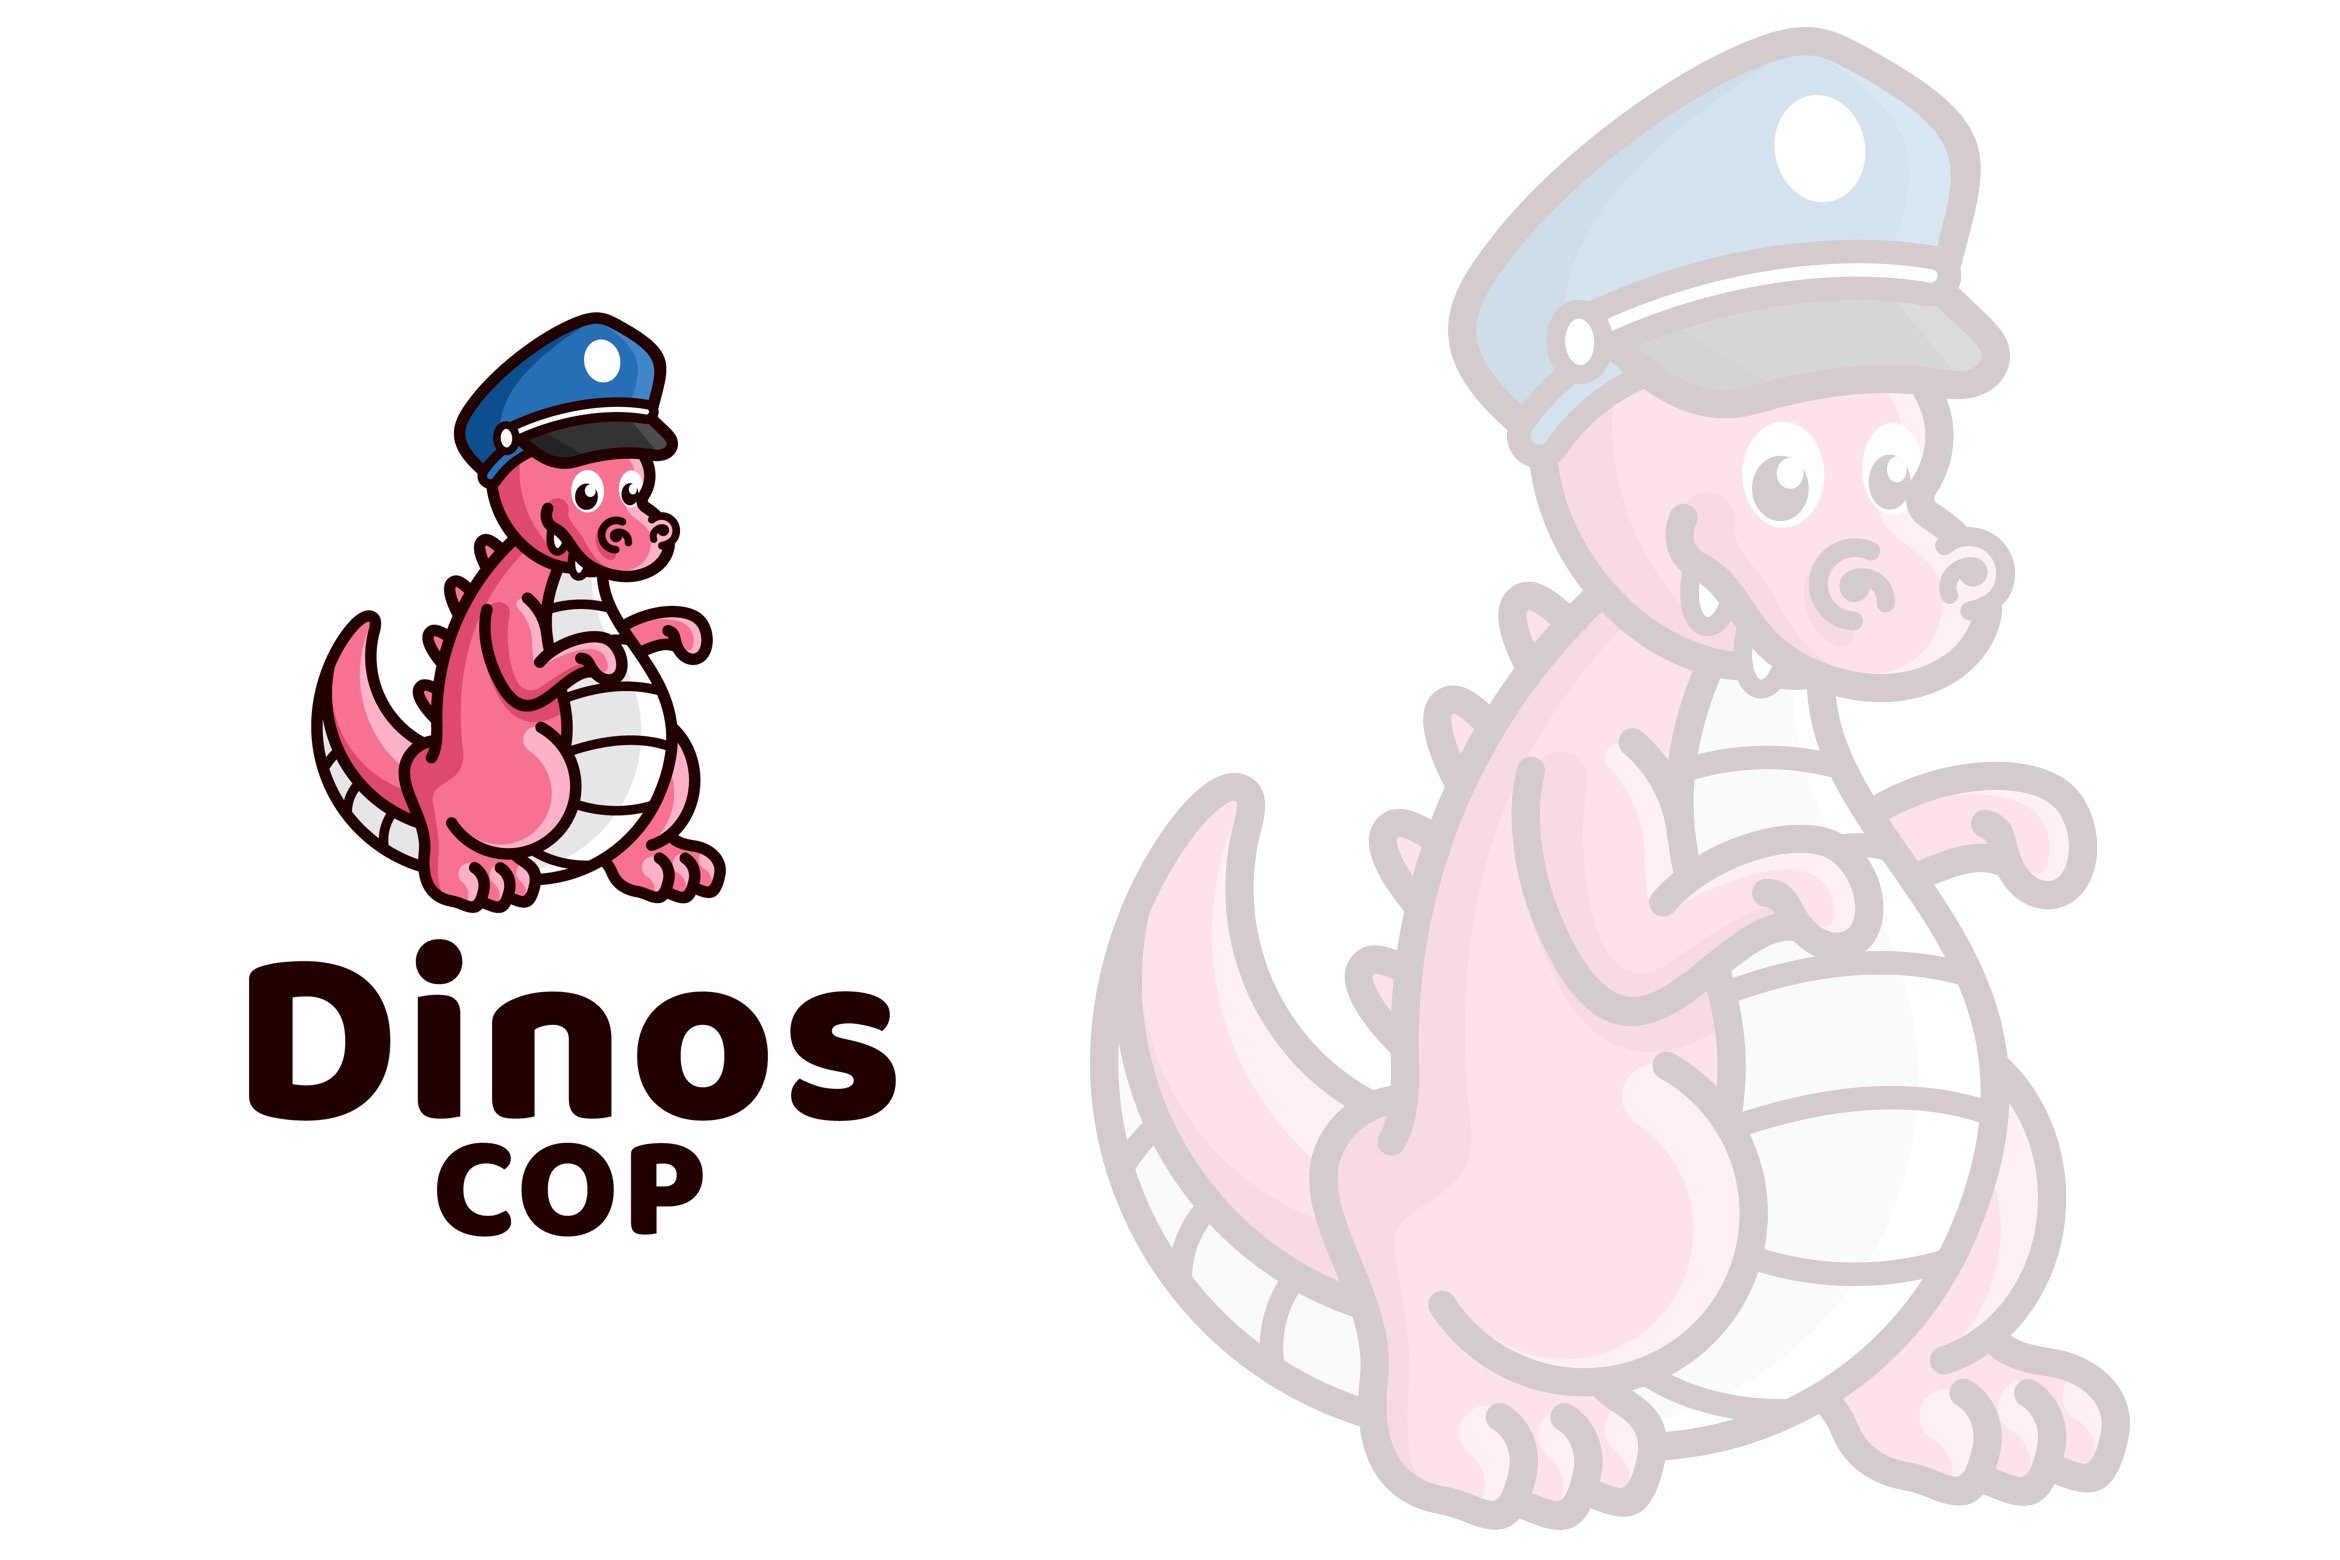 Dinos Cop Cute Kids Logo Template cover image.